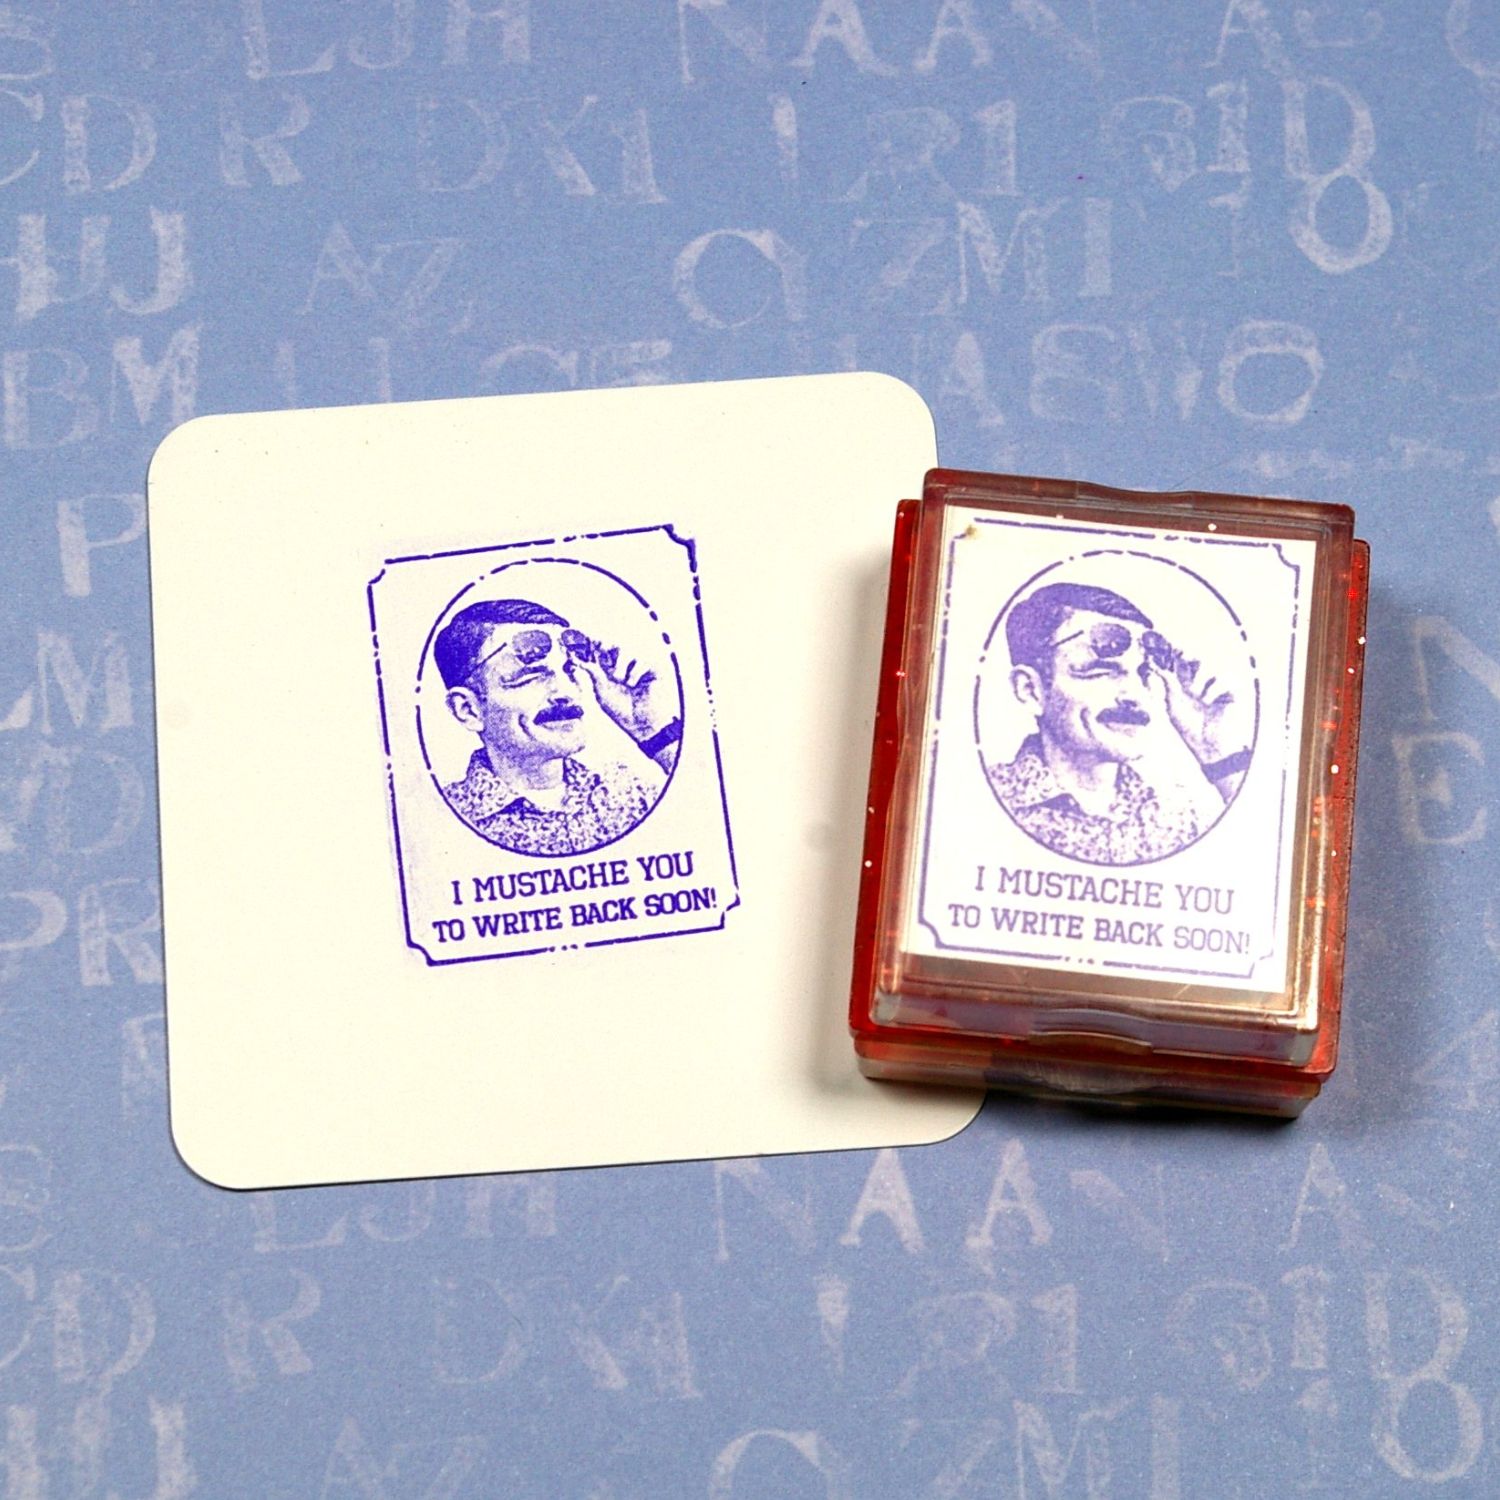 Stampics  Incredible Rubber Stamps Made from Your Photos!